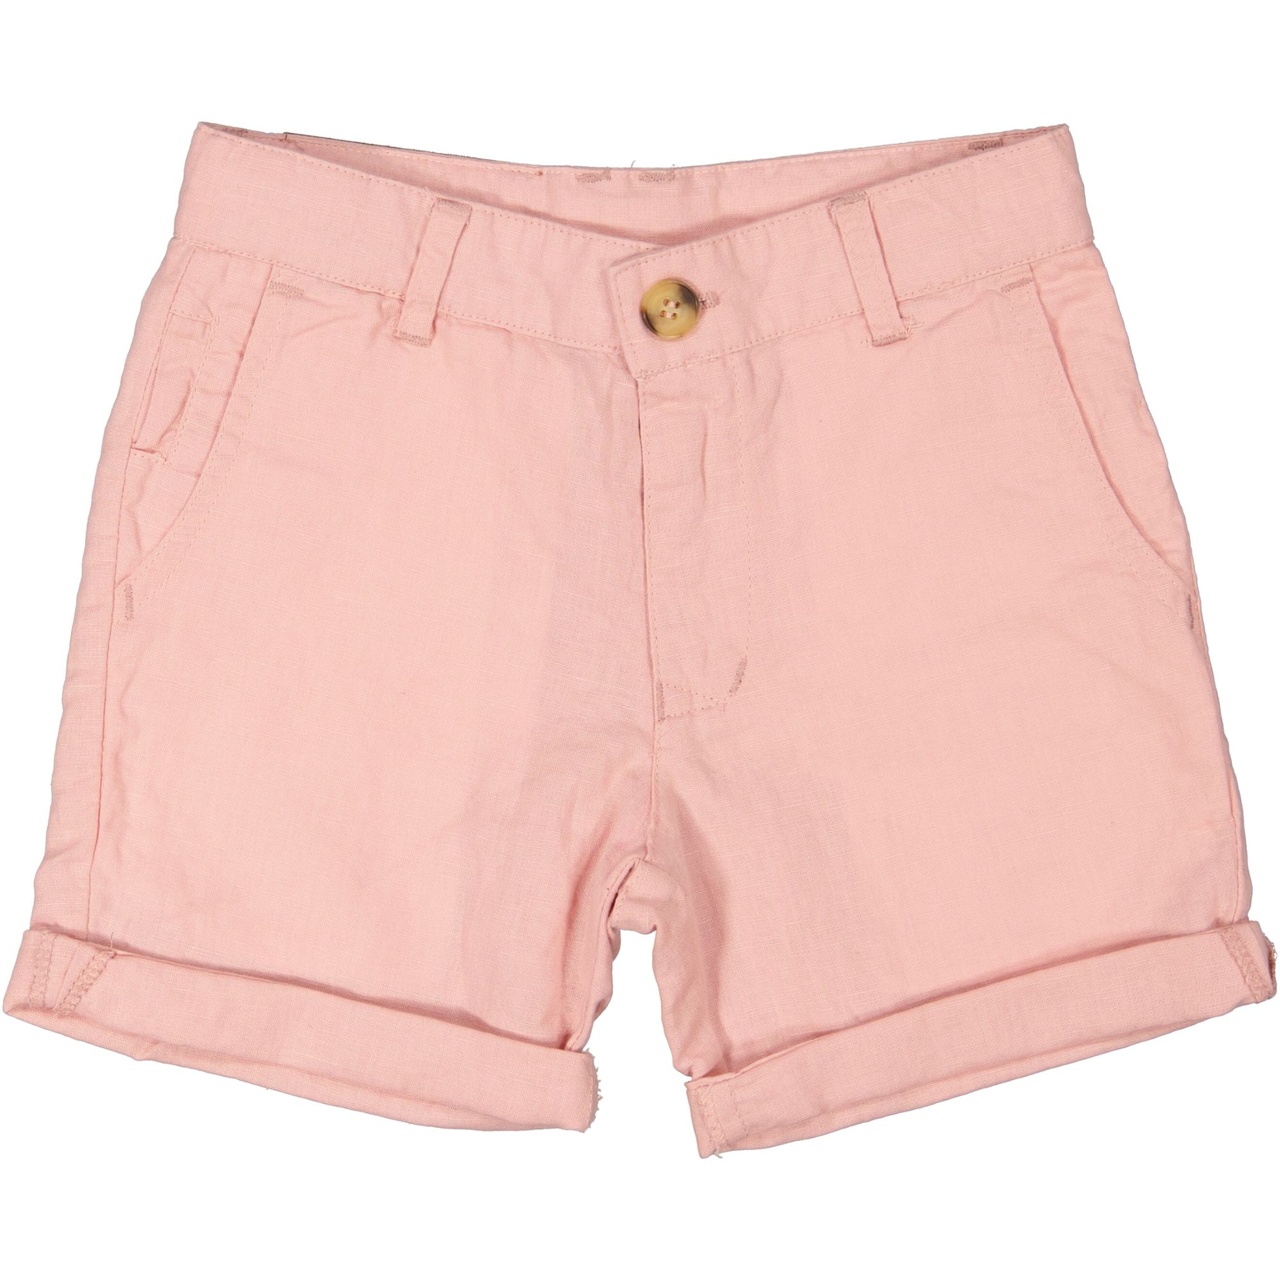 Linnen shorts Old pink 134/140